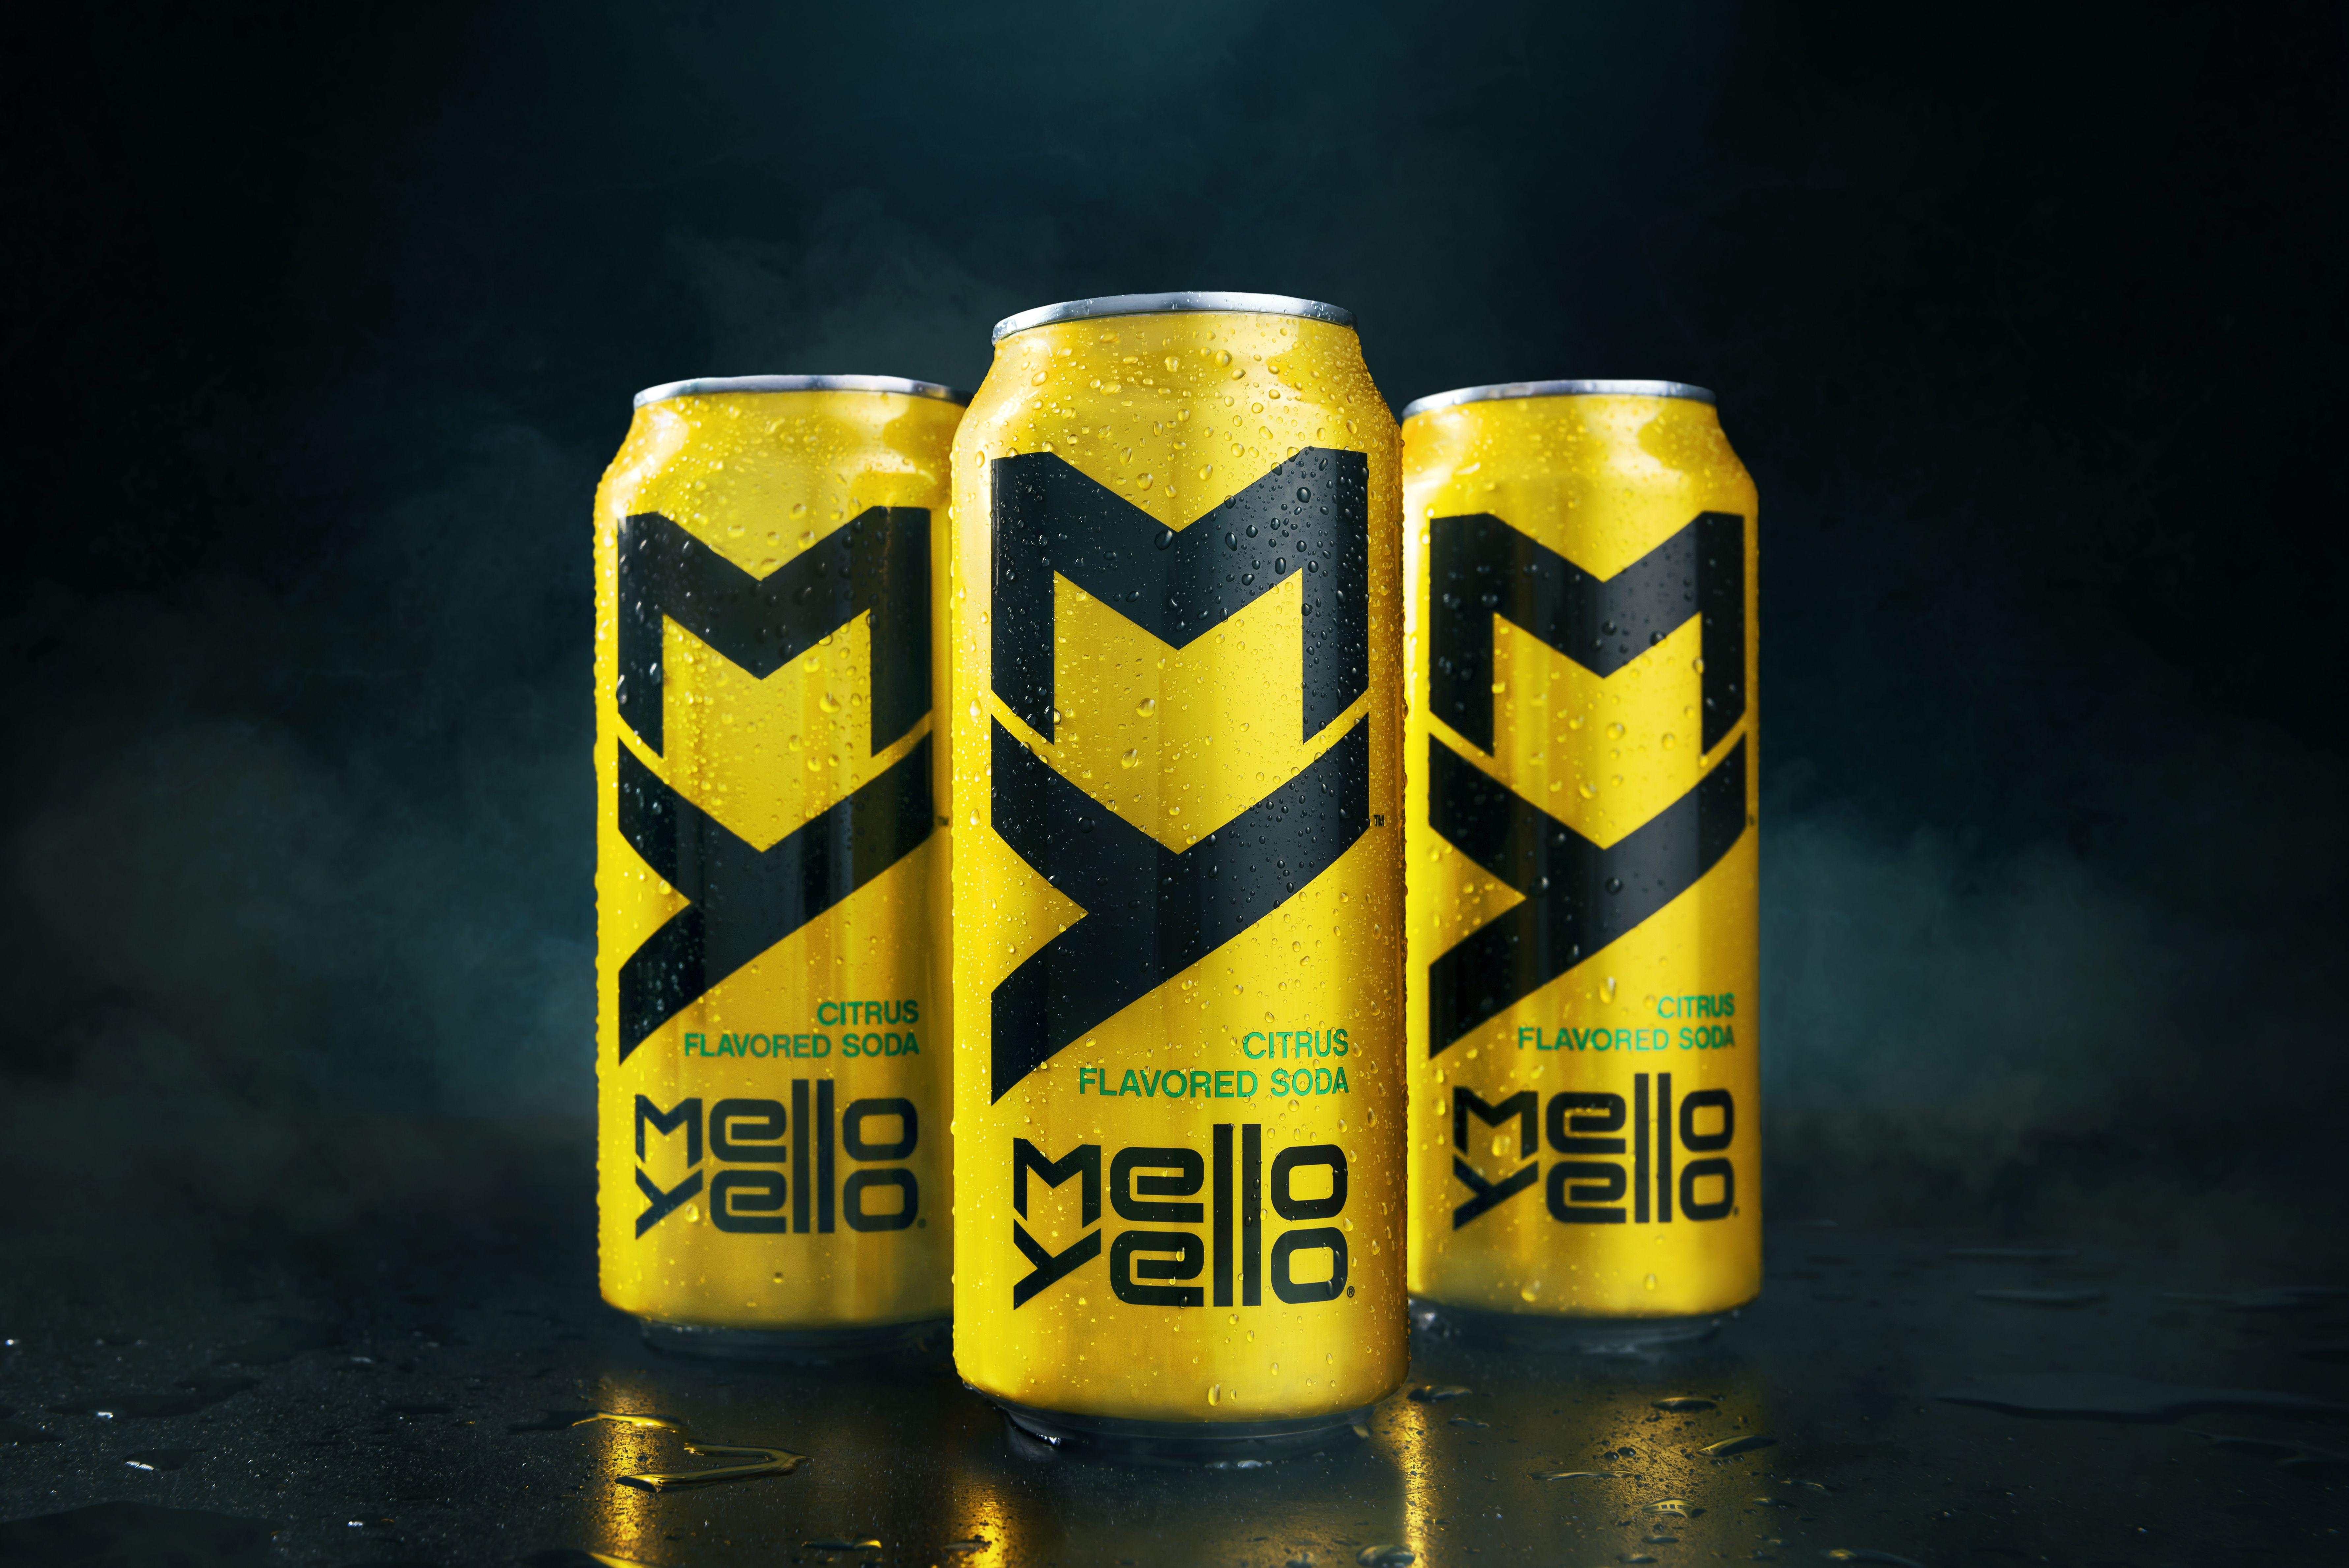 Mellow Yellow Logo - The New Look of Mello Yello is Anything but Mello | Business Wire